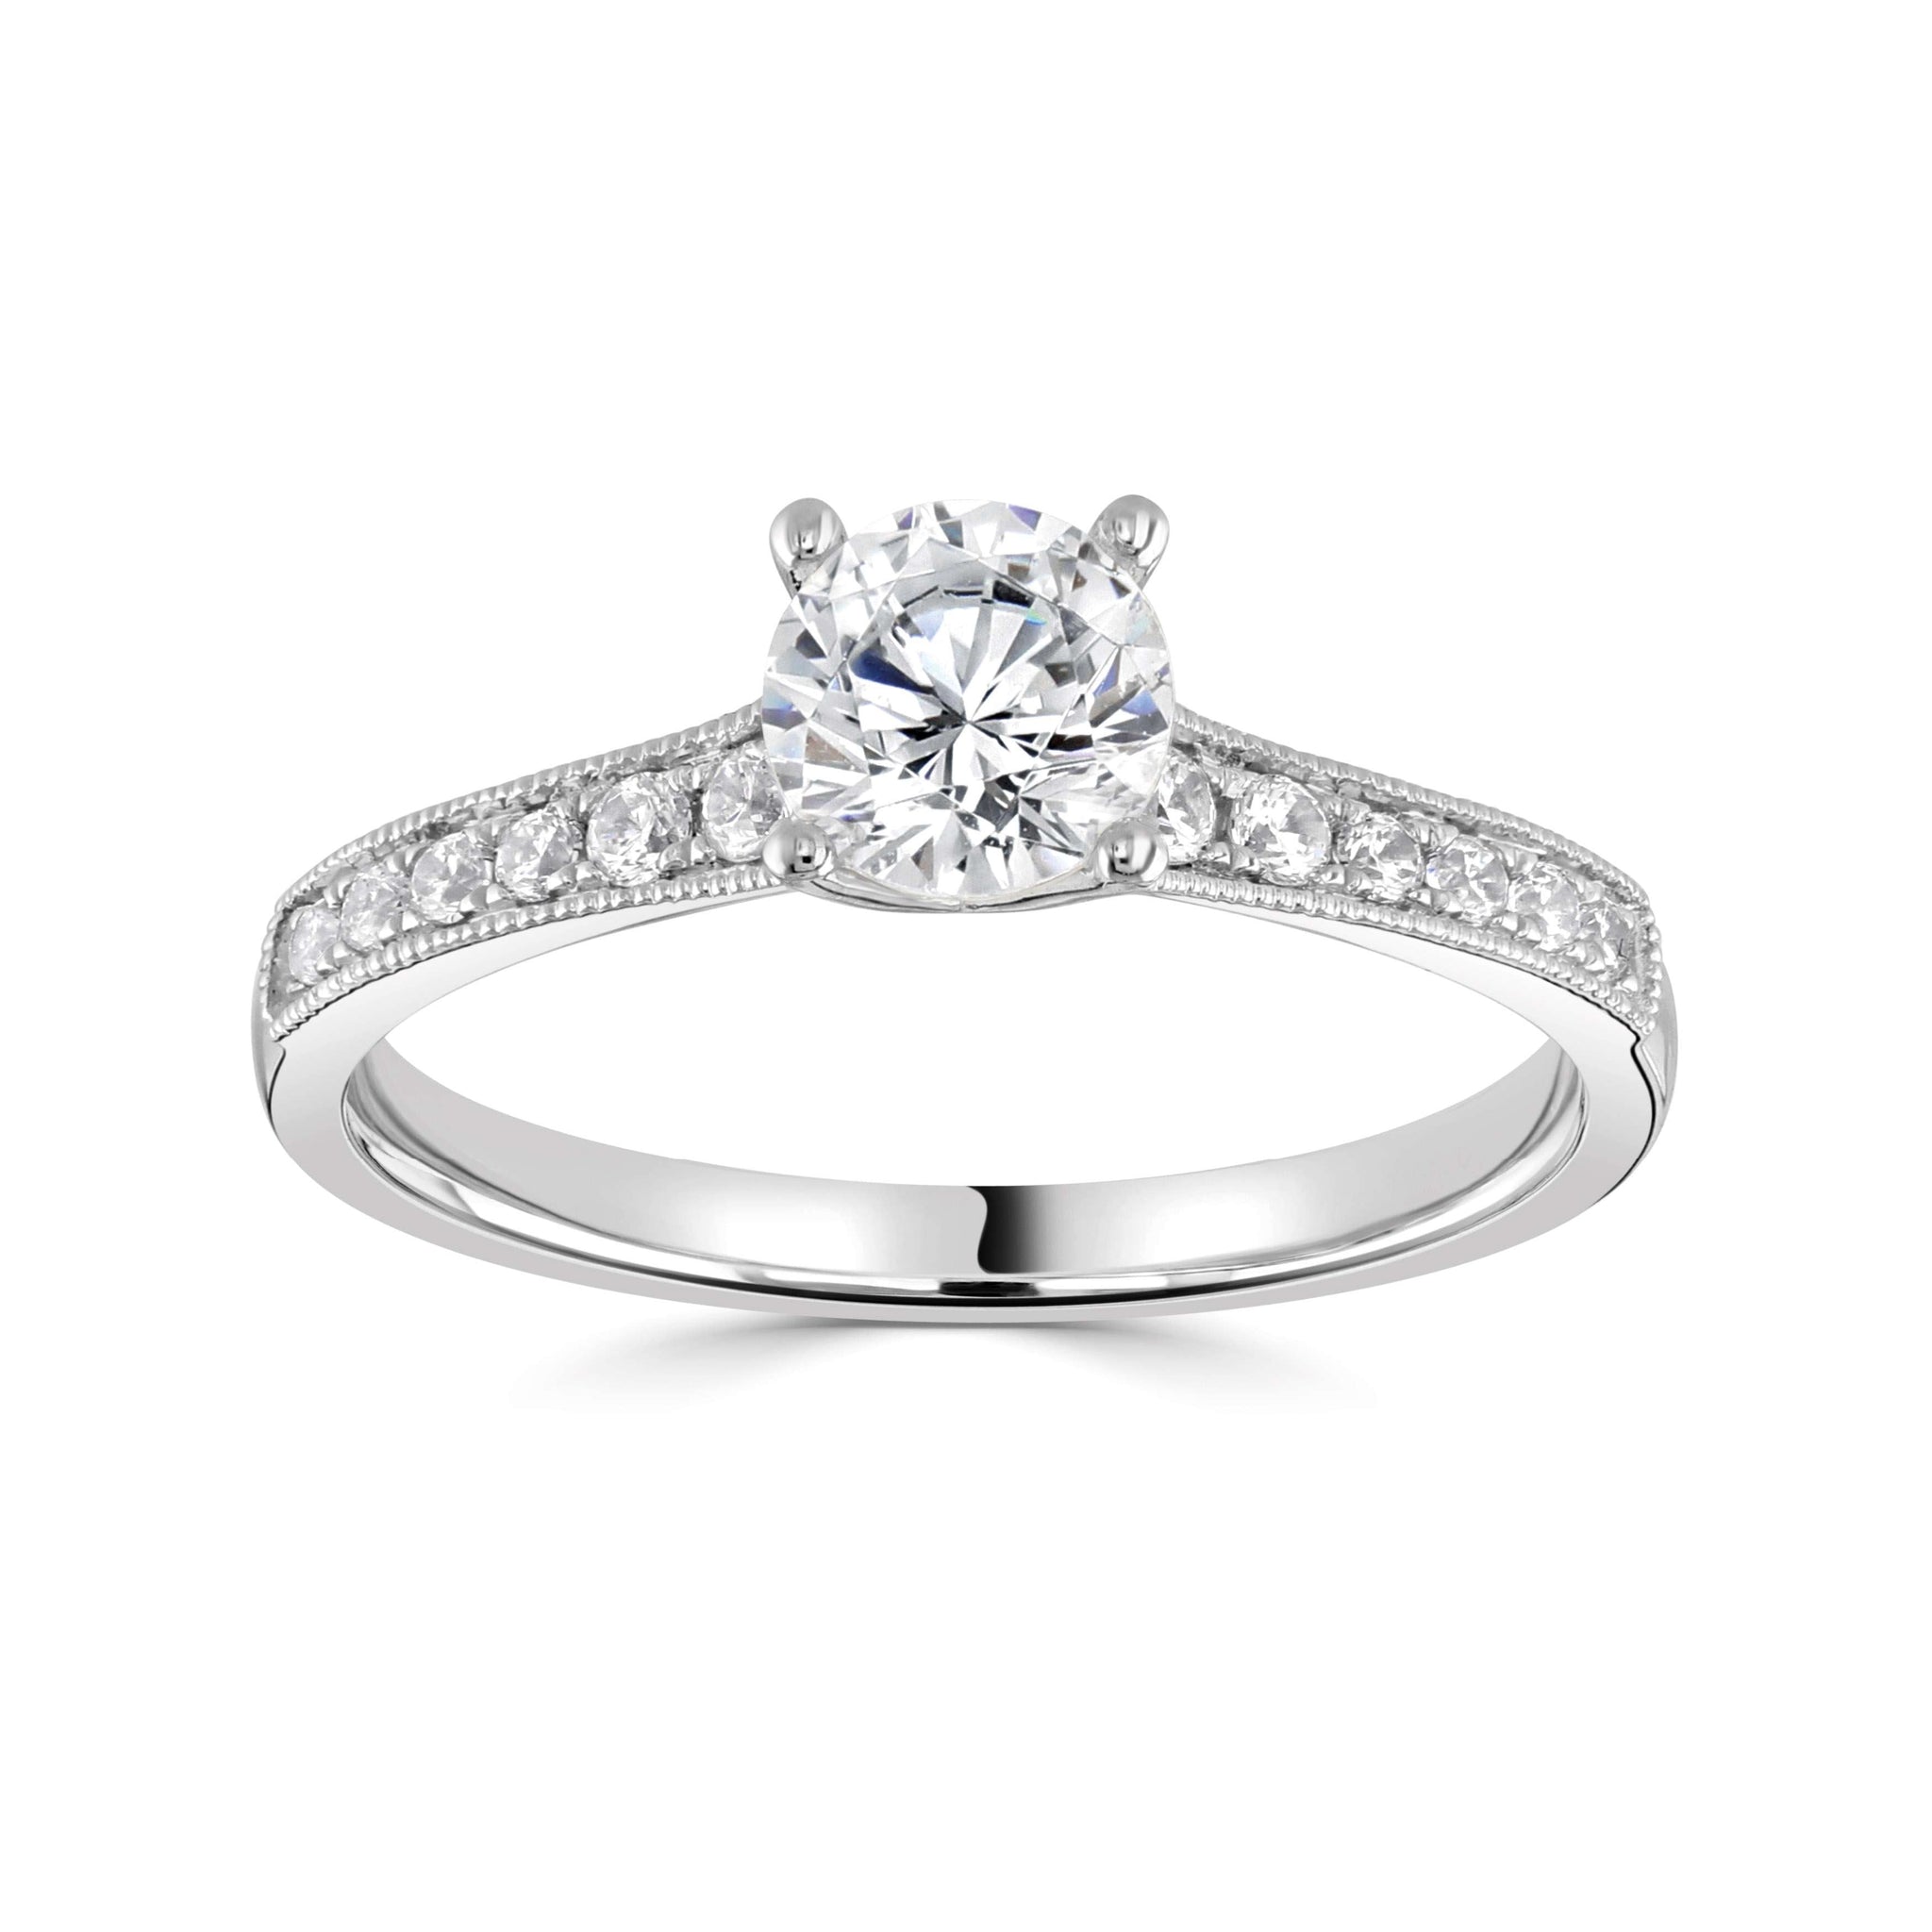 Evie *Select a Round Diamond 0.25ct or above